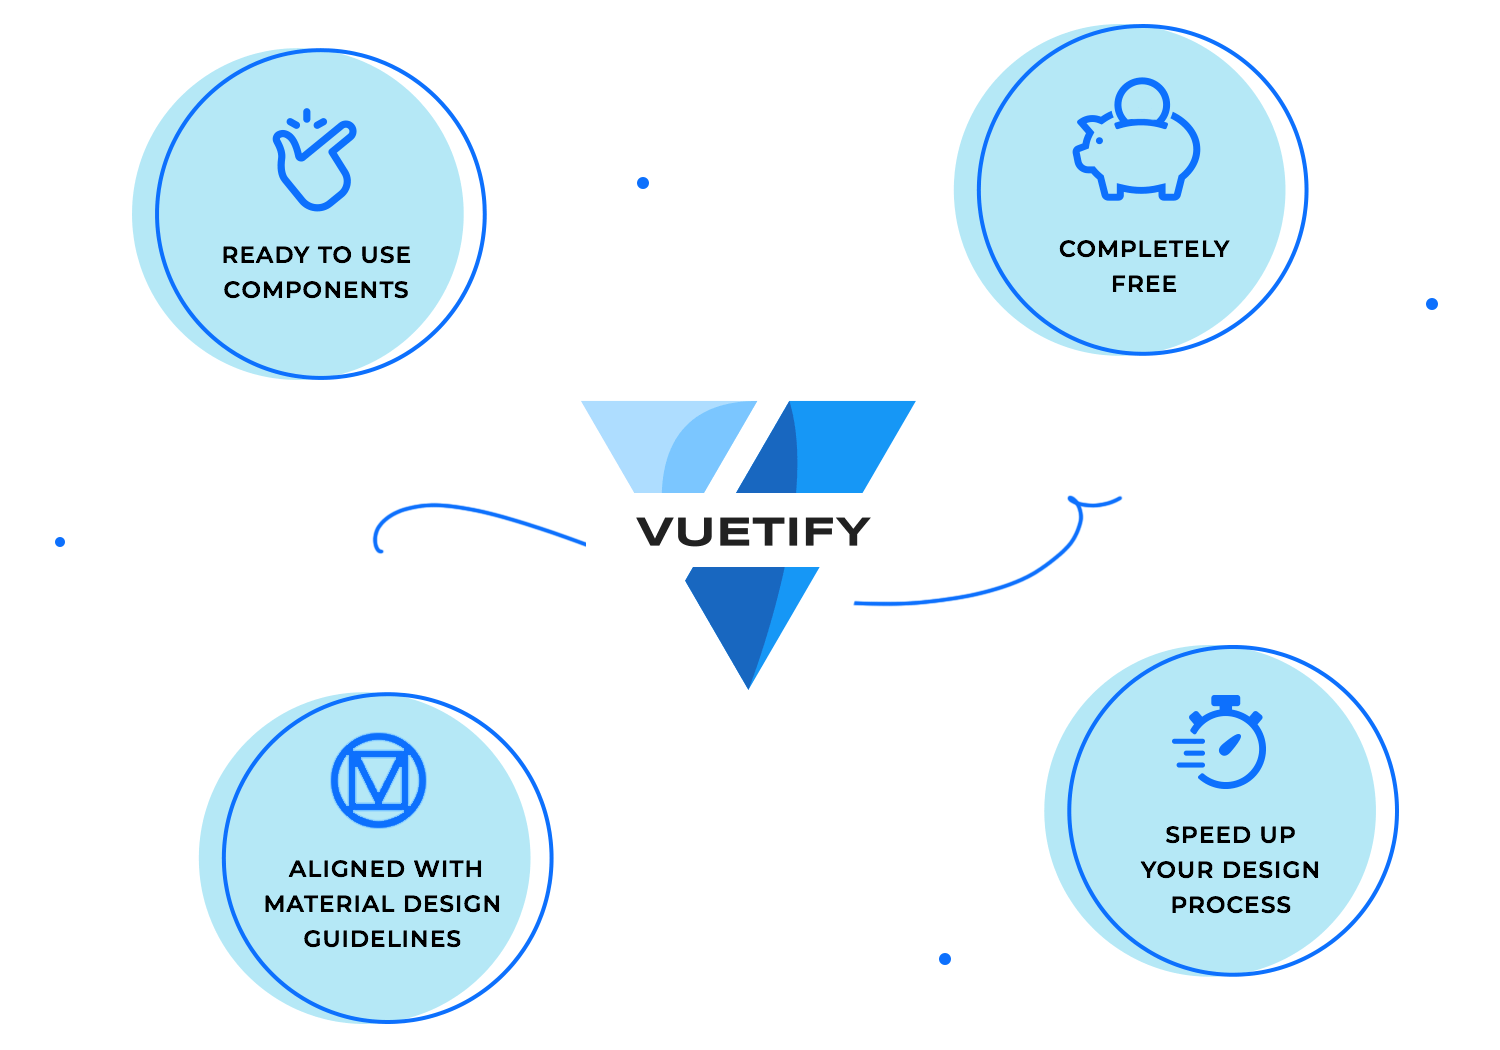 Advantages of using our Vuetify UI library